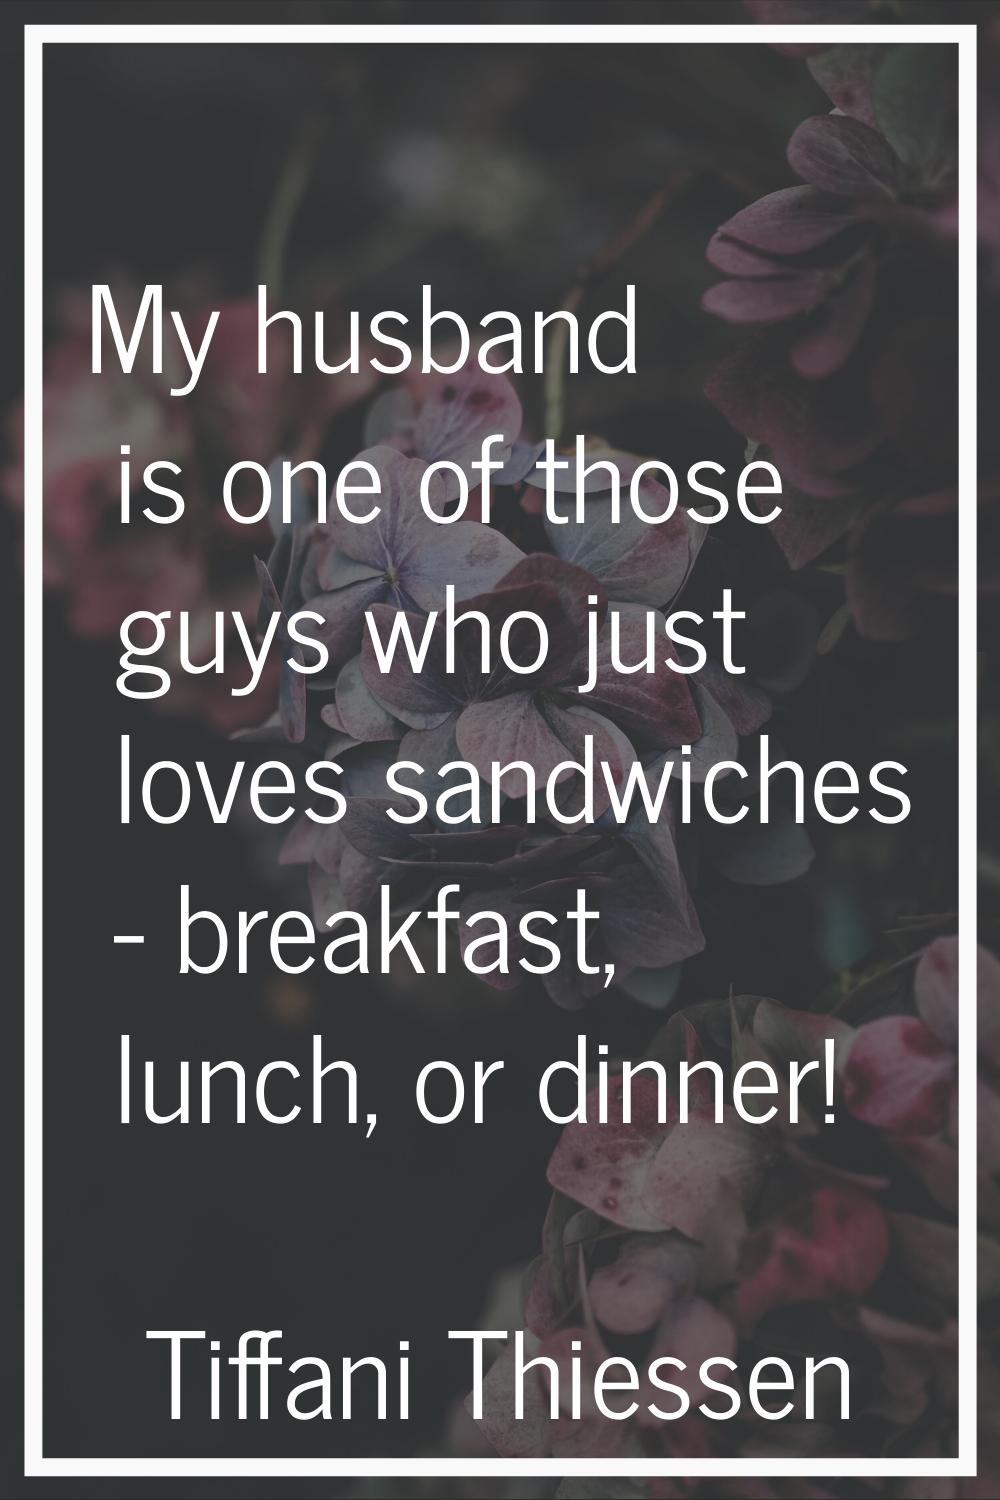 My husband is one of those guys who just loves sandwiches - breakfast, lunch, or dinner!